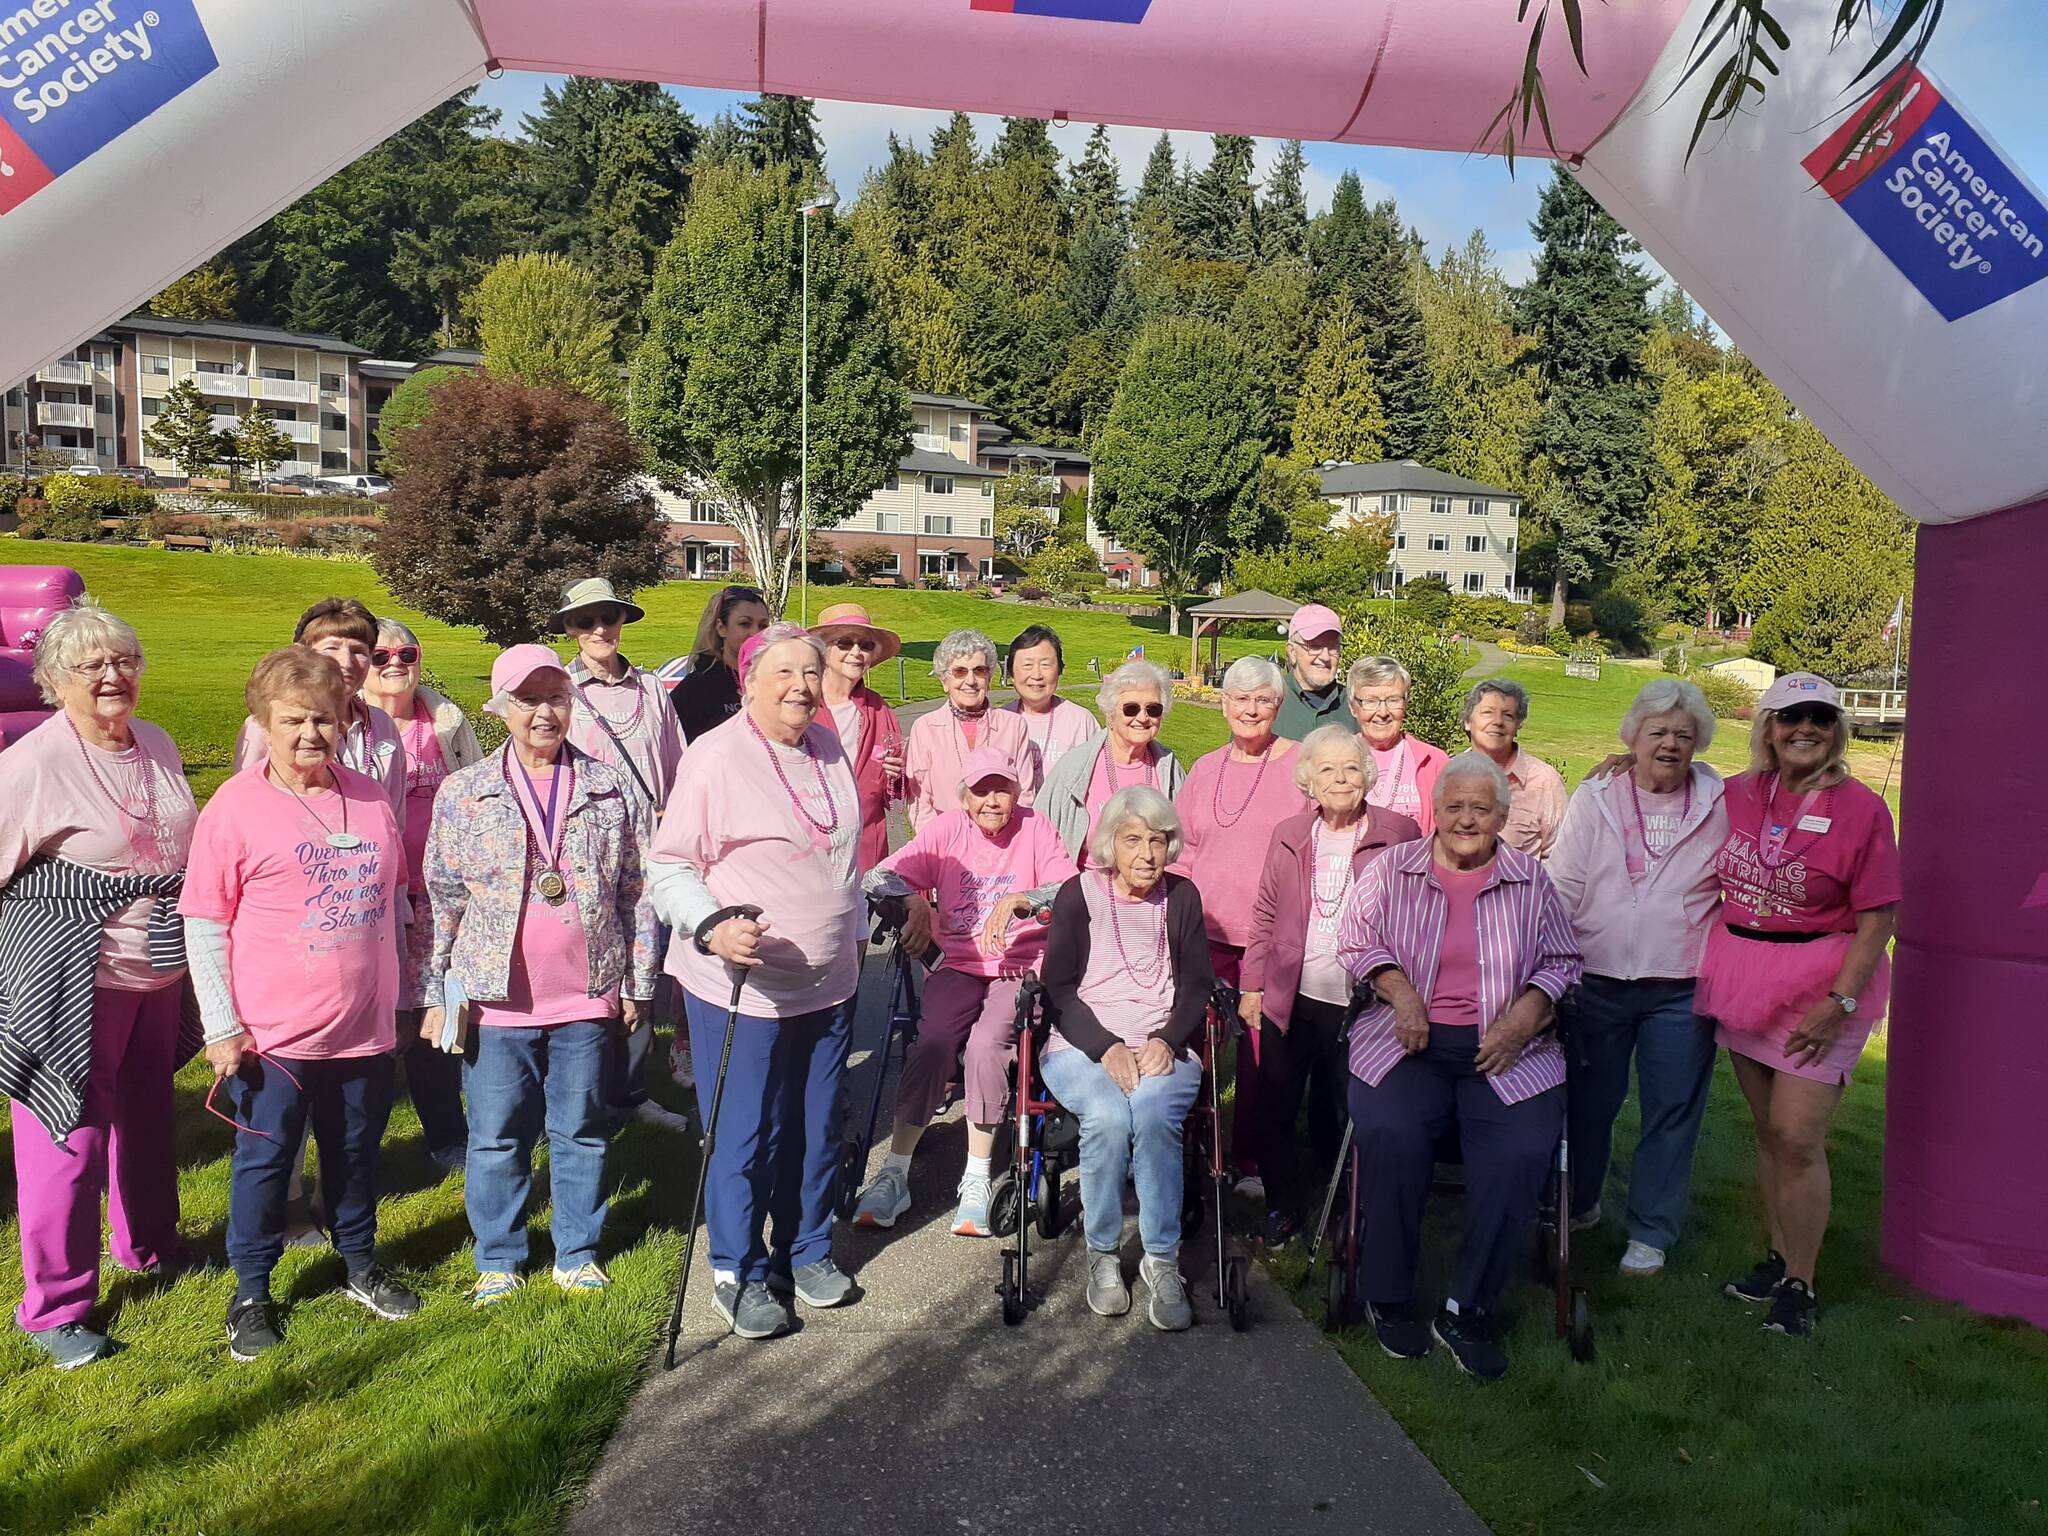 Mercer Island Covenant Living at the Shores residents and employees participated in their ninth annual Making Strides Against Breast Cancer to support the American Cancer Society (ACS). Those resident cancer survivors made the first lap of the walk to kick things off. So far, residents and employees raised more than $4,000 to support the Seattle Making Strides. The team has been one of the top fundraisers in Seattle area every year. Roxanne Stickney, resident life director and breast cancer survivor, started the walk in 2015 to show support to campus residents and families affected by breast cancer. She is thankful for the opportunity to support ACS and the awareness it raises to save lives. For more information on the Seattle Making Strides Against Breast Cancer at Gasworks Park on Oct. 21, visit: <a href="https://tinyurl.com/mw9tf3wv" target="_blank">https://tinyurl.com/mw9tf3wv</a>. Courtesy photo